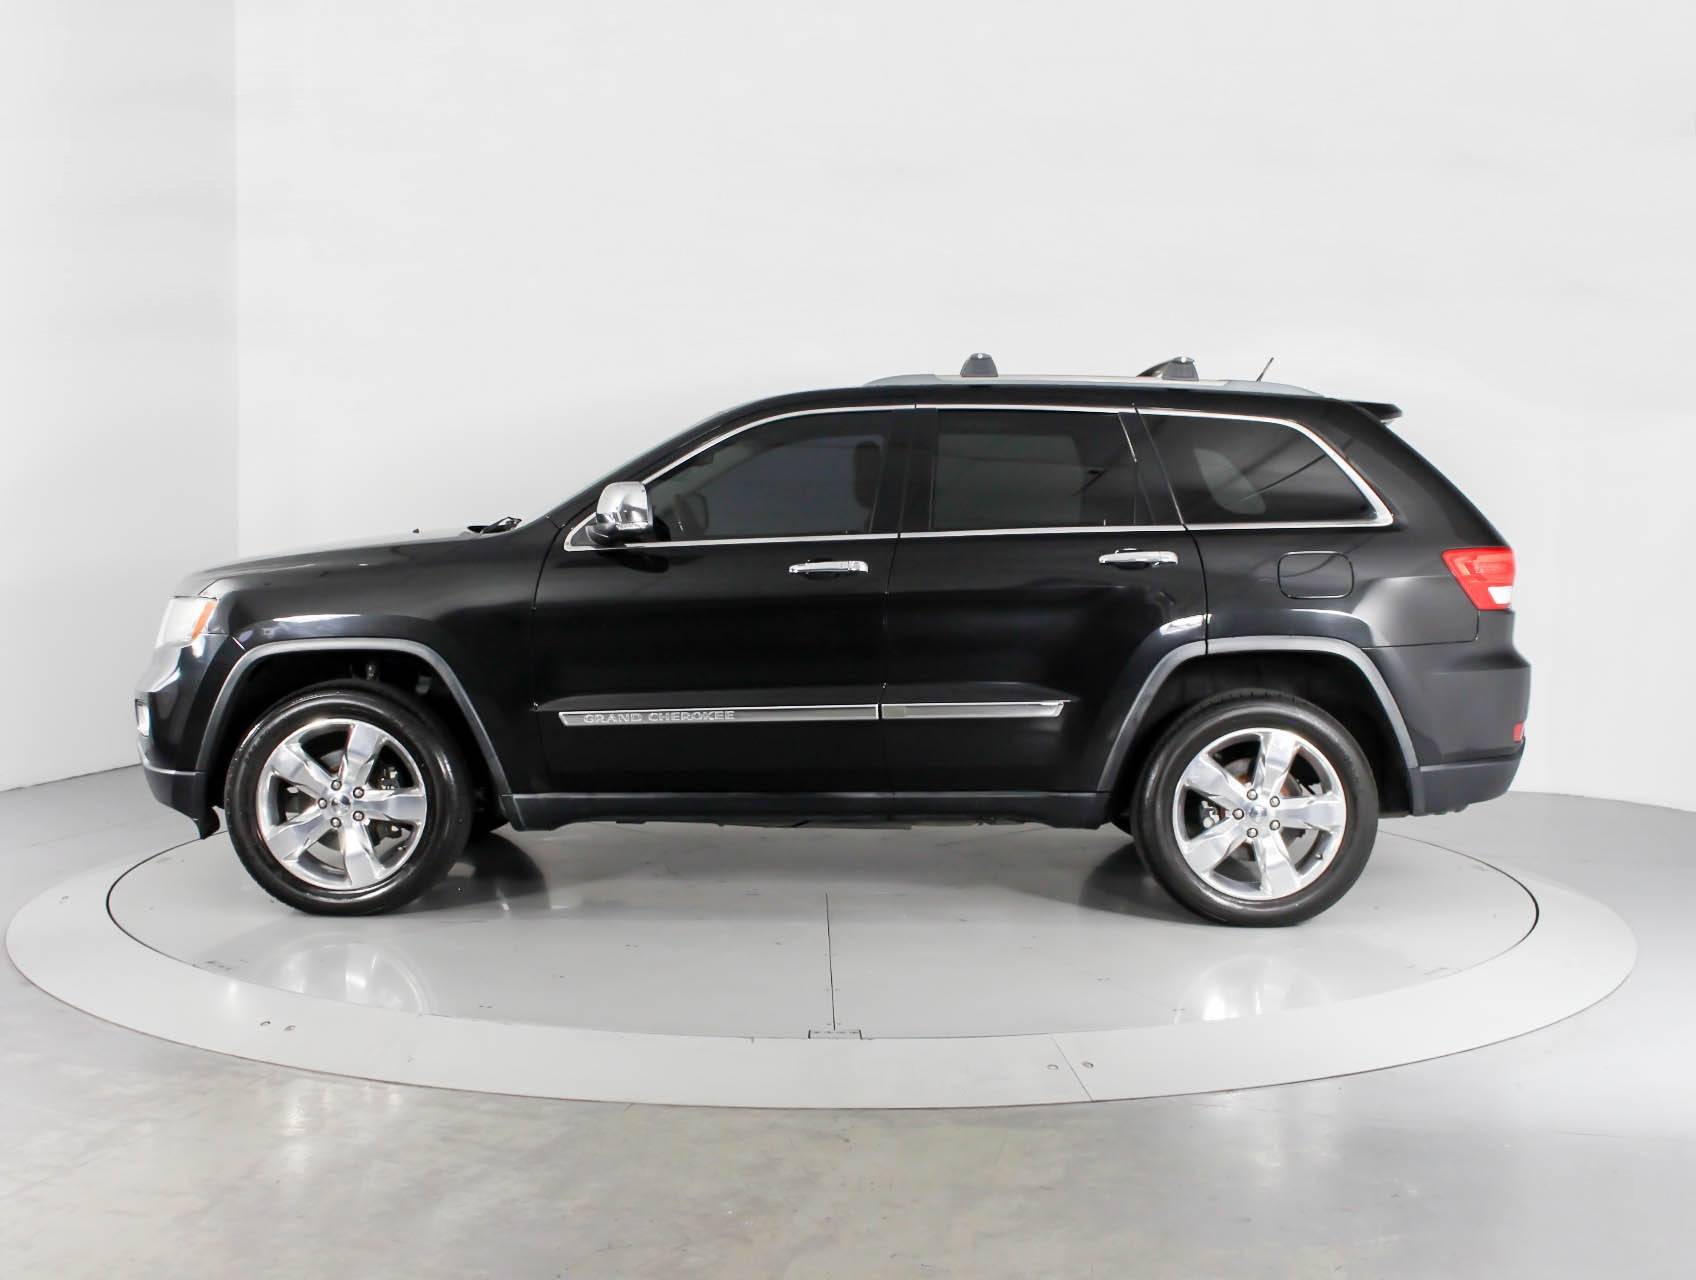 Used 2012 Jeep Grand Cherokee Overland 4x4 Suv For Sale In